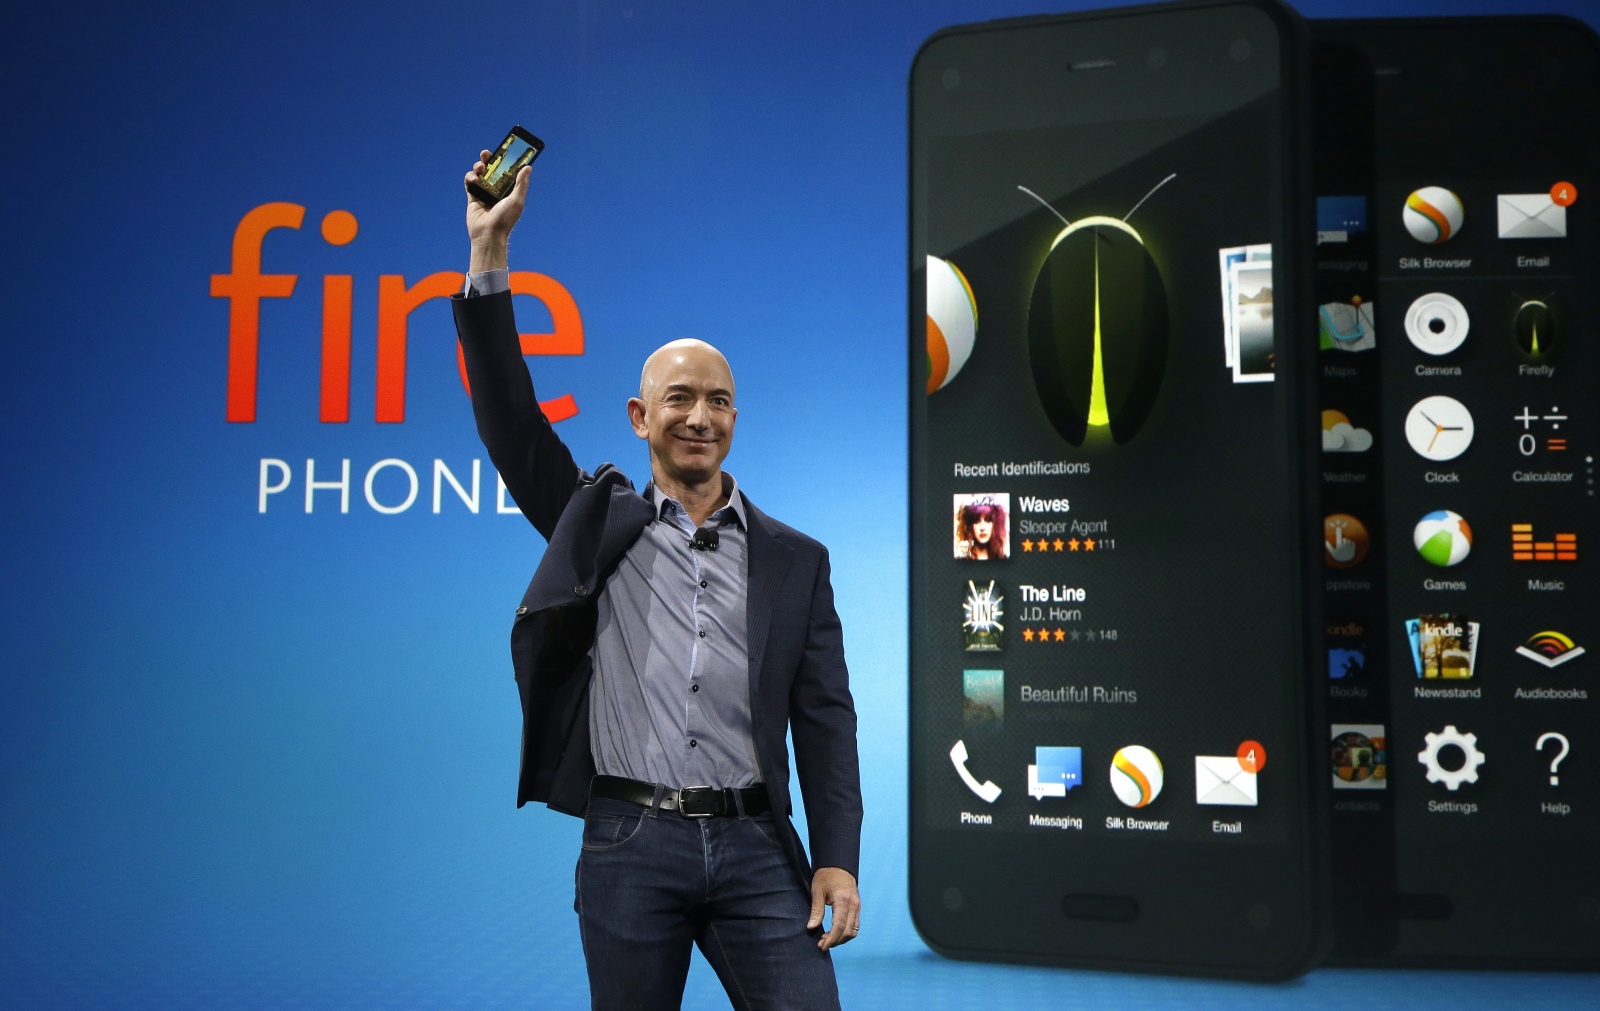 amazon-shrinks-hardware-division-ditches-projects-following-fire-phone-flop-image-cultofandroidcomwp-contentuploads20140821c49917c77195fe9b31118f0d3299ea-jpg